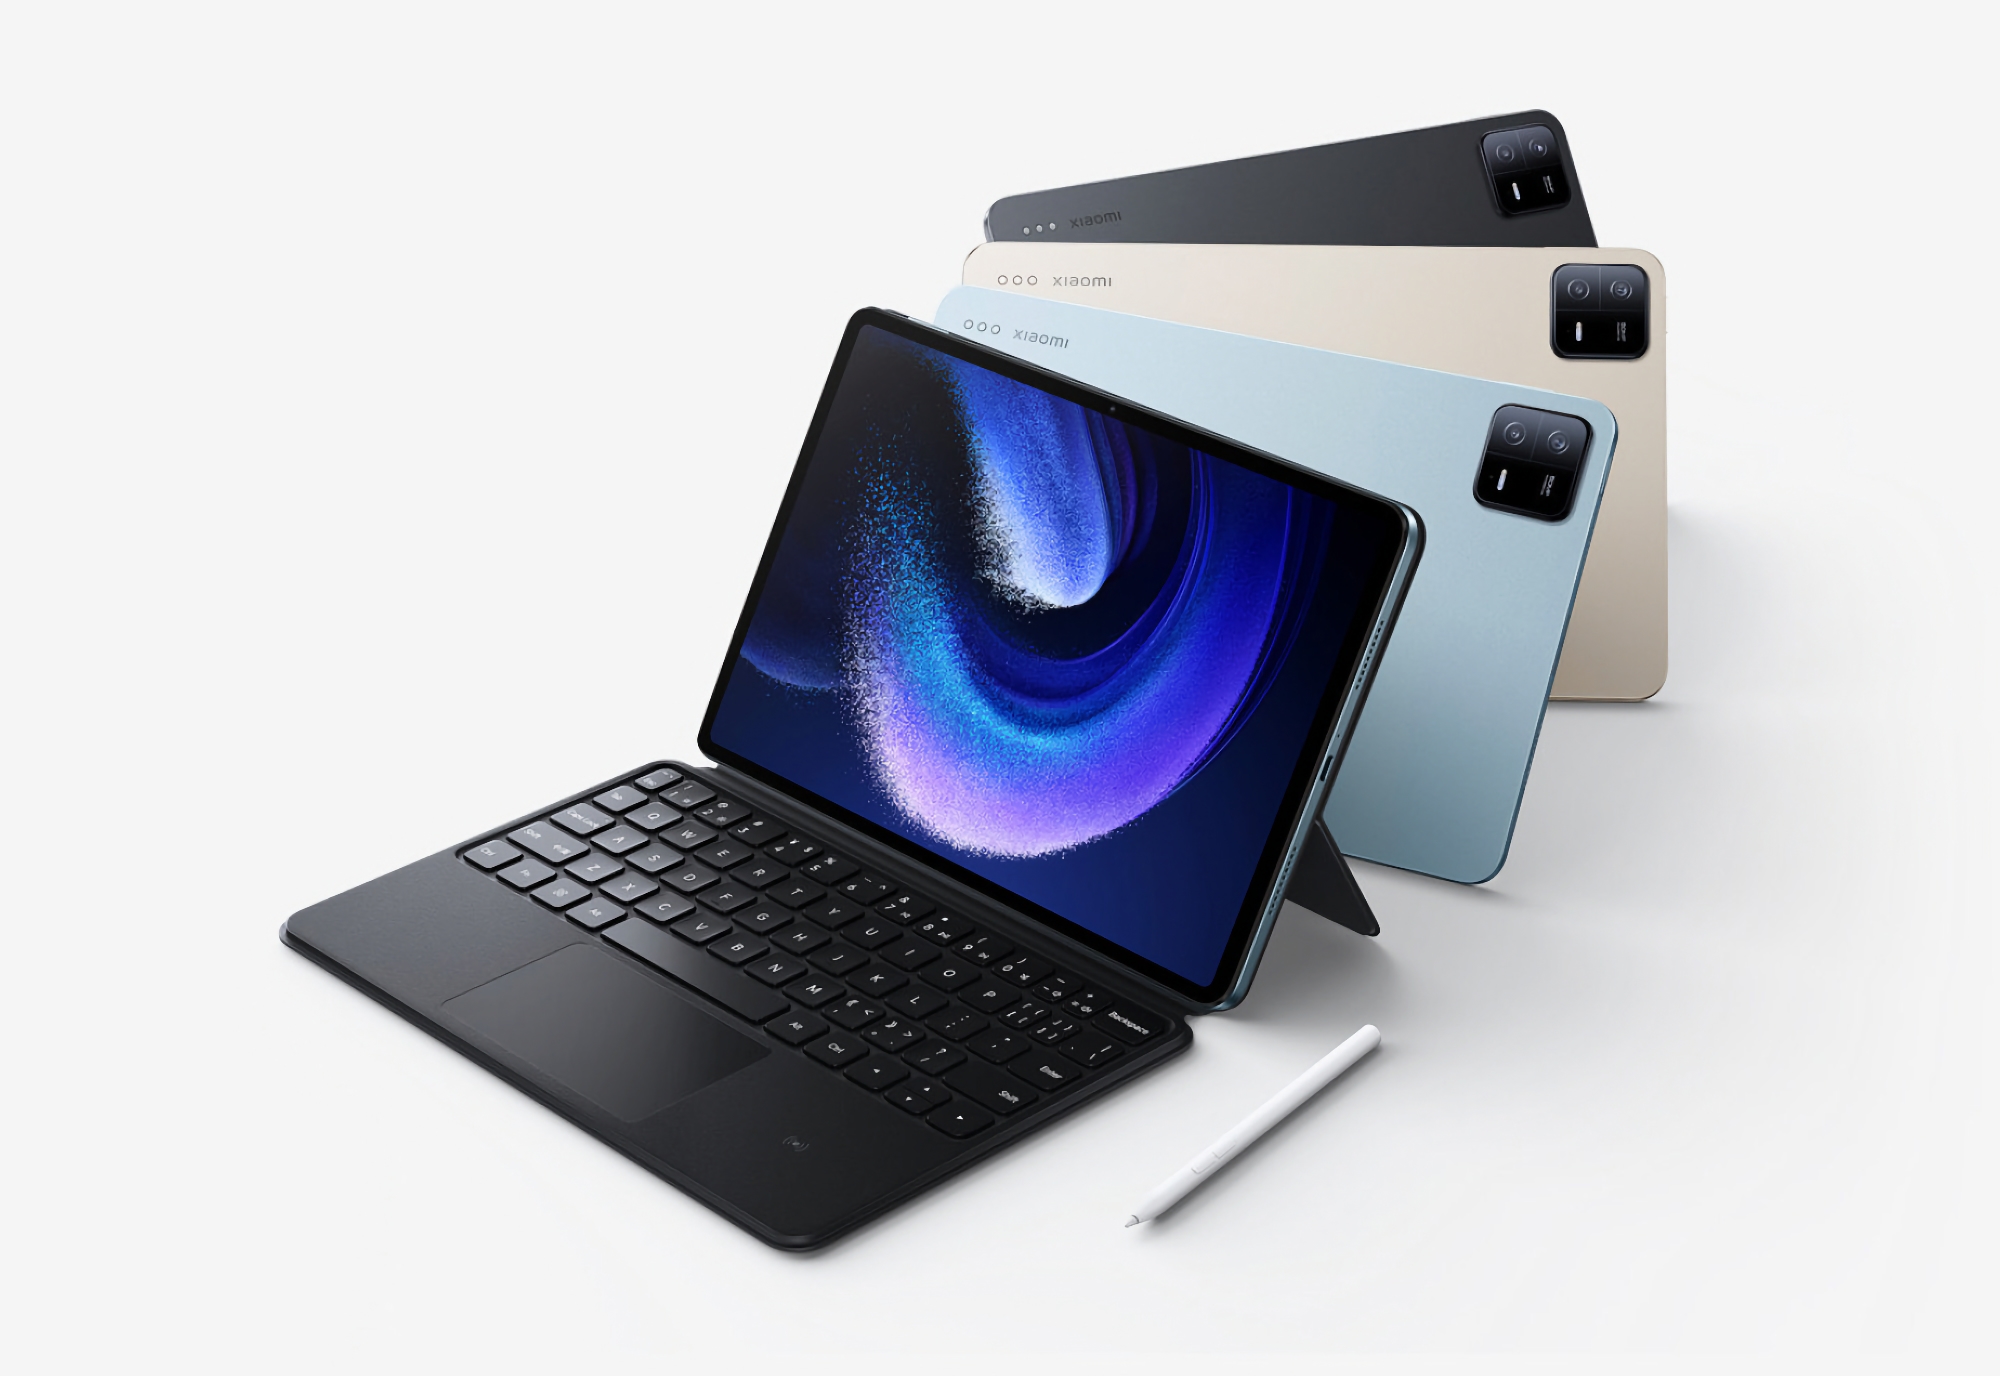 144Hz LCD display, Snapdragon 8 Gen 3 chip and 10,000mAh battery: insider reveals Xiaomi Pad 7 Pro specs